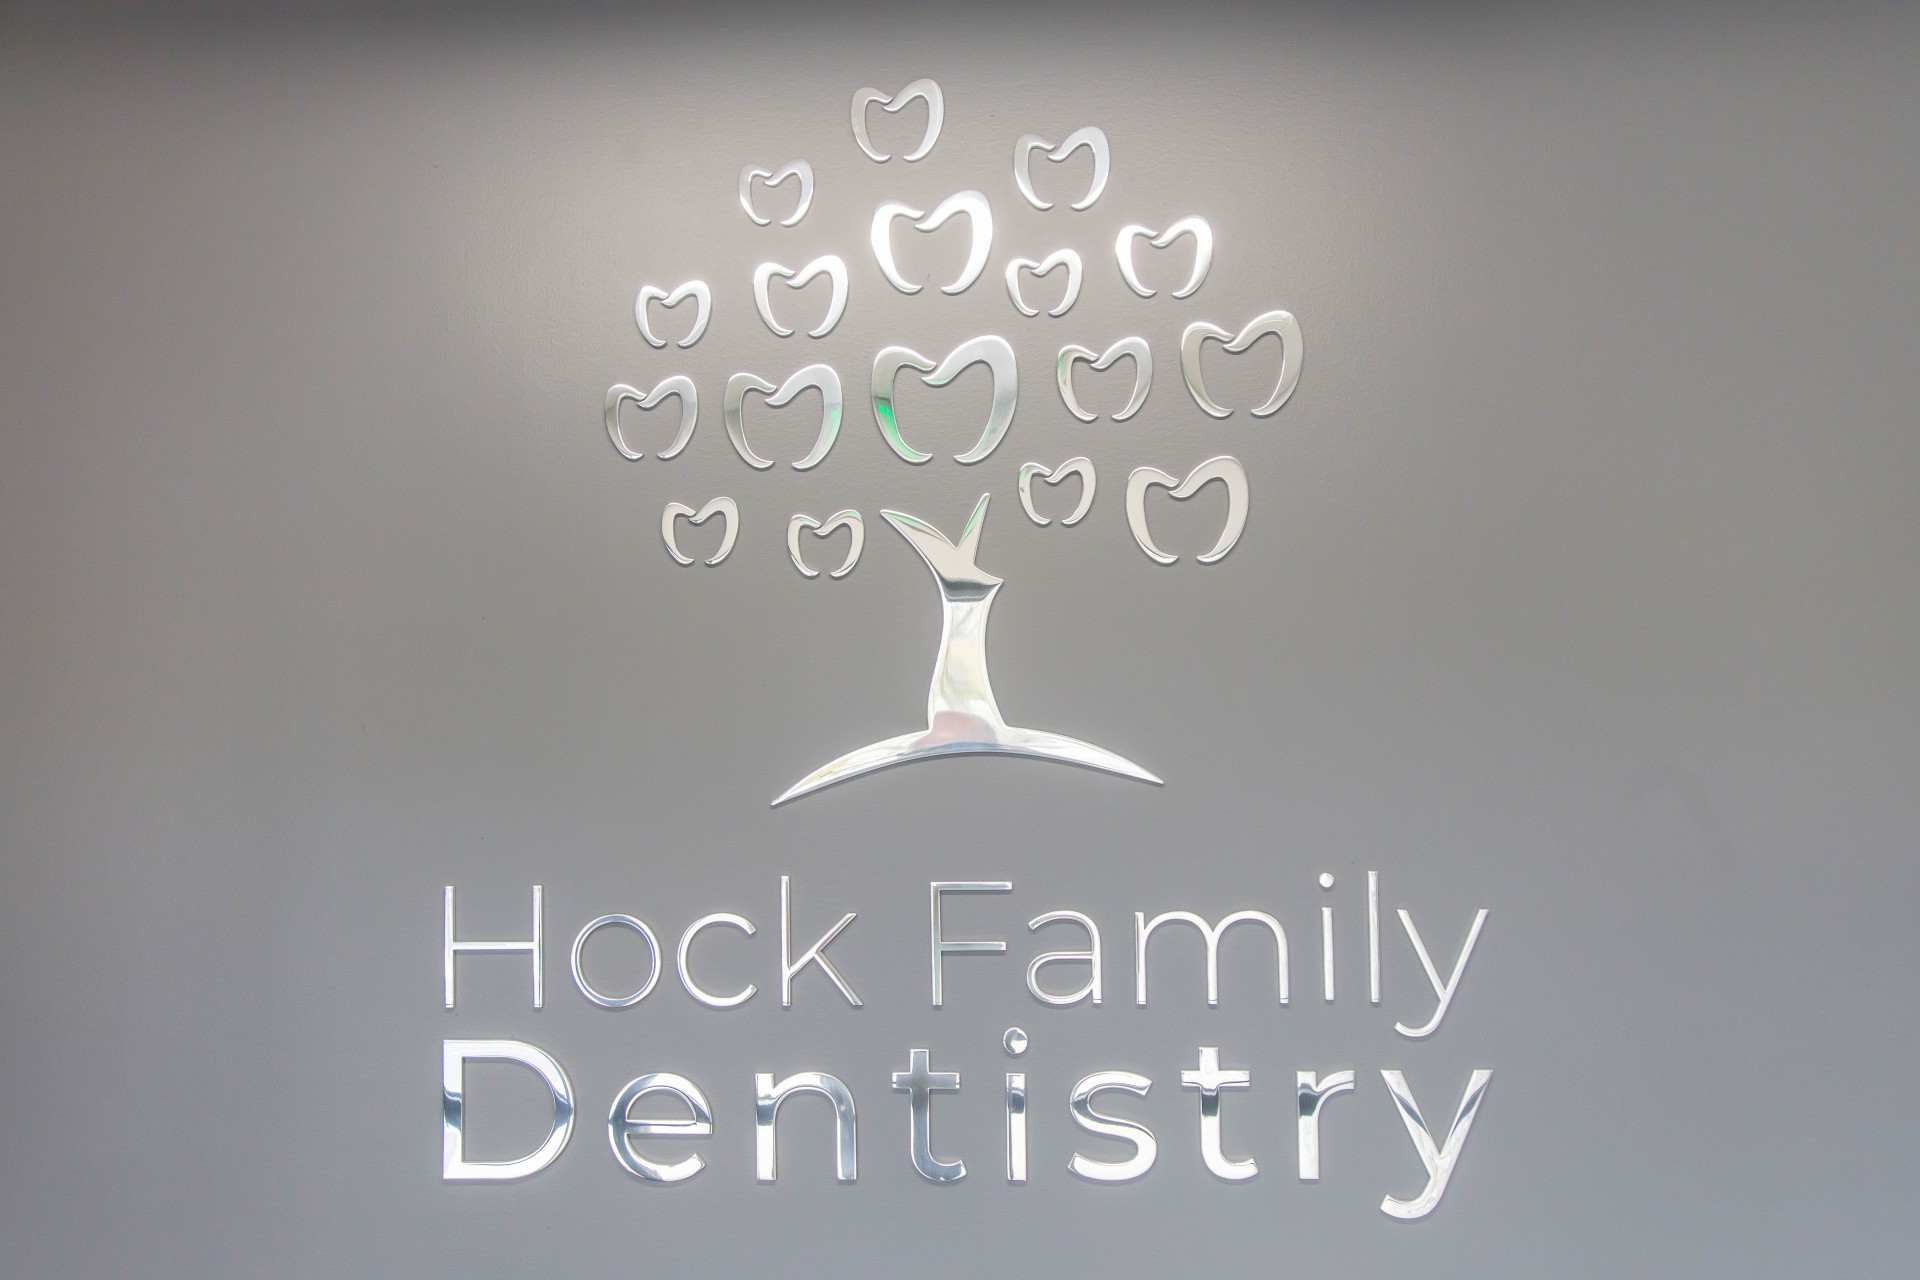 Hock Family Dentistry Architectural Details